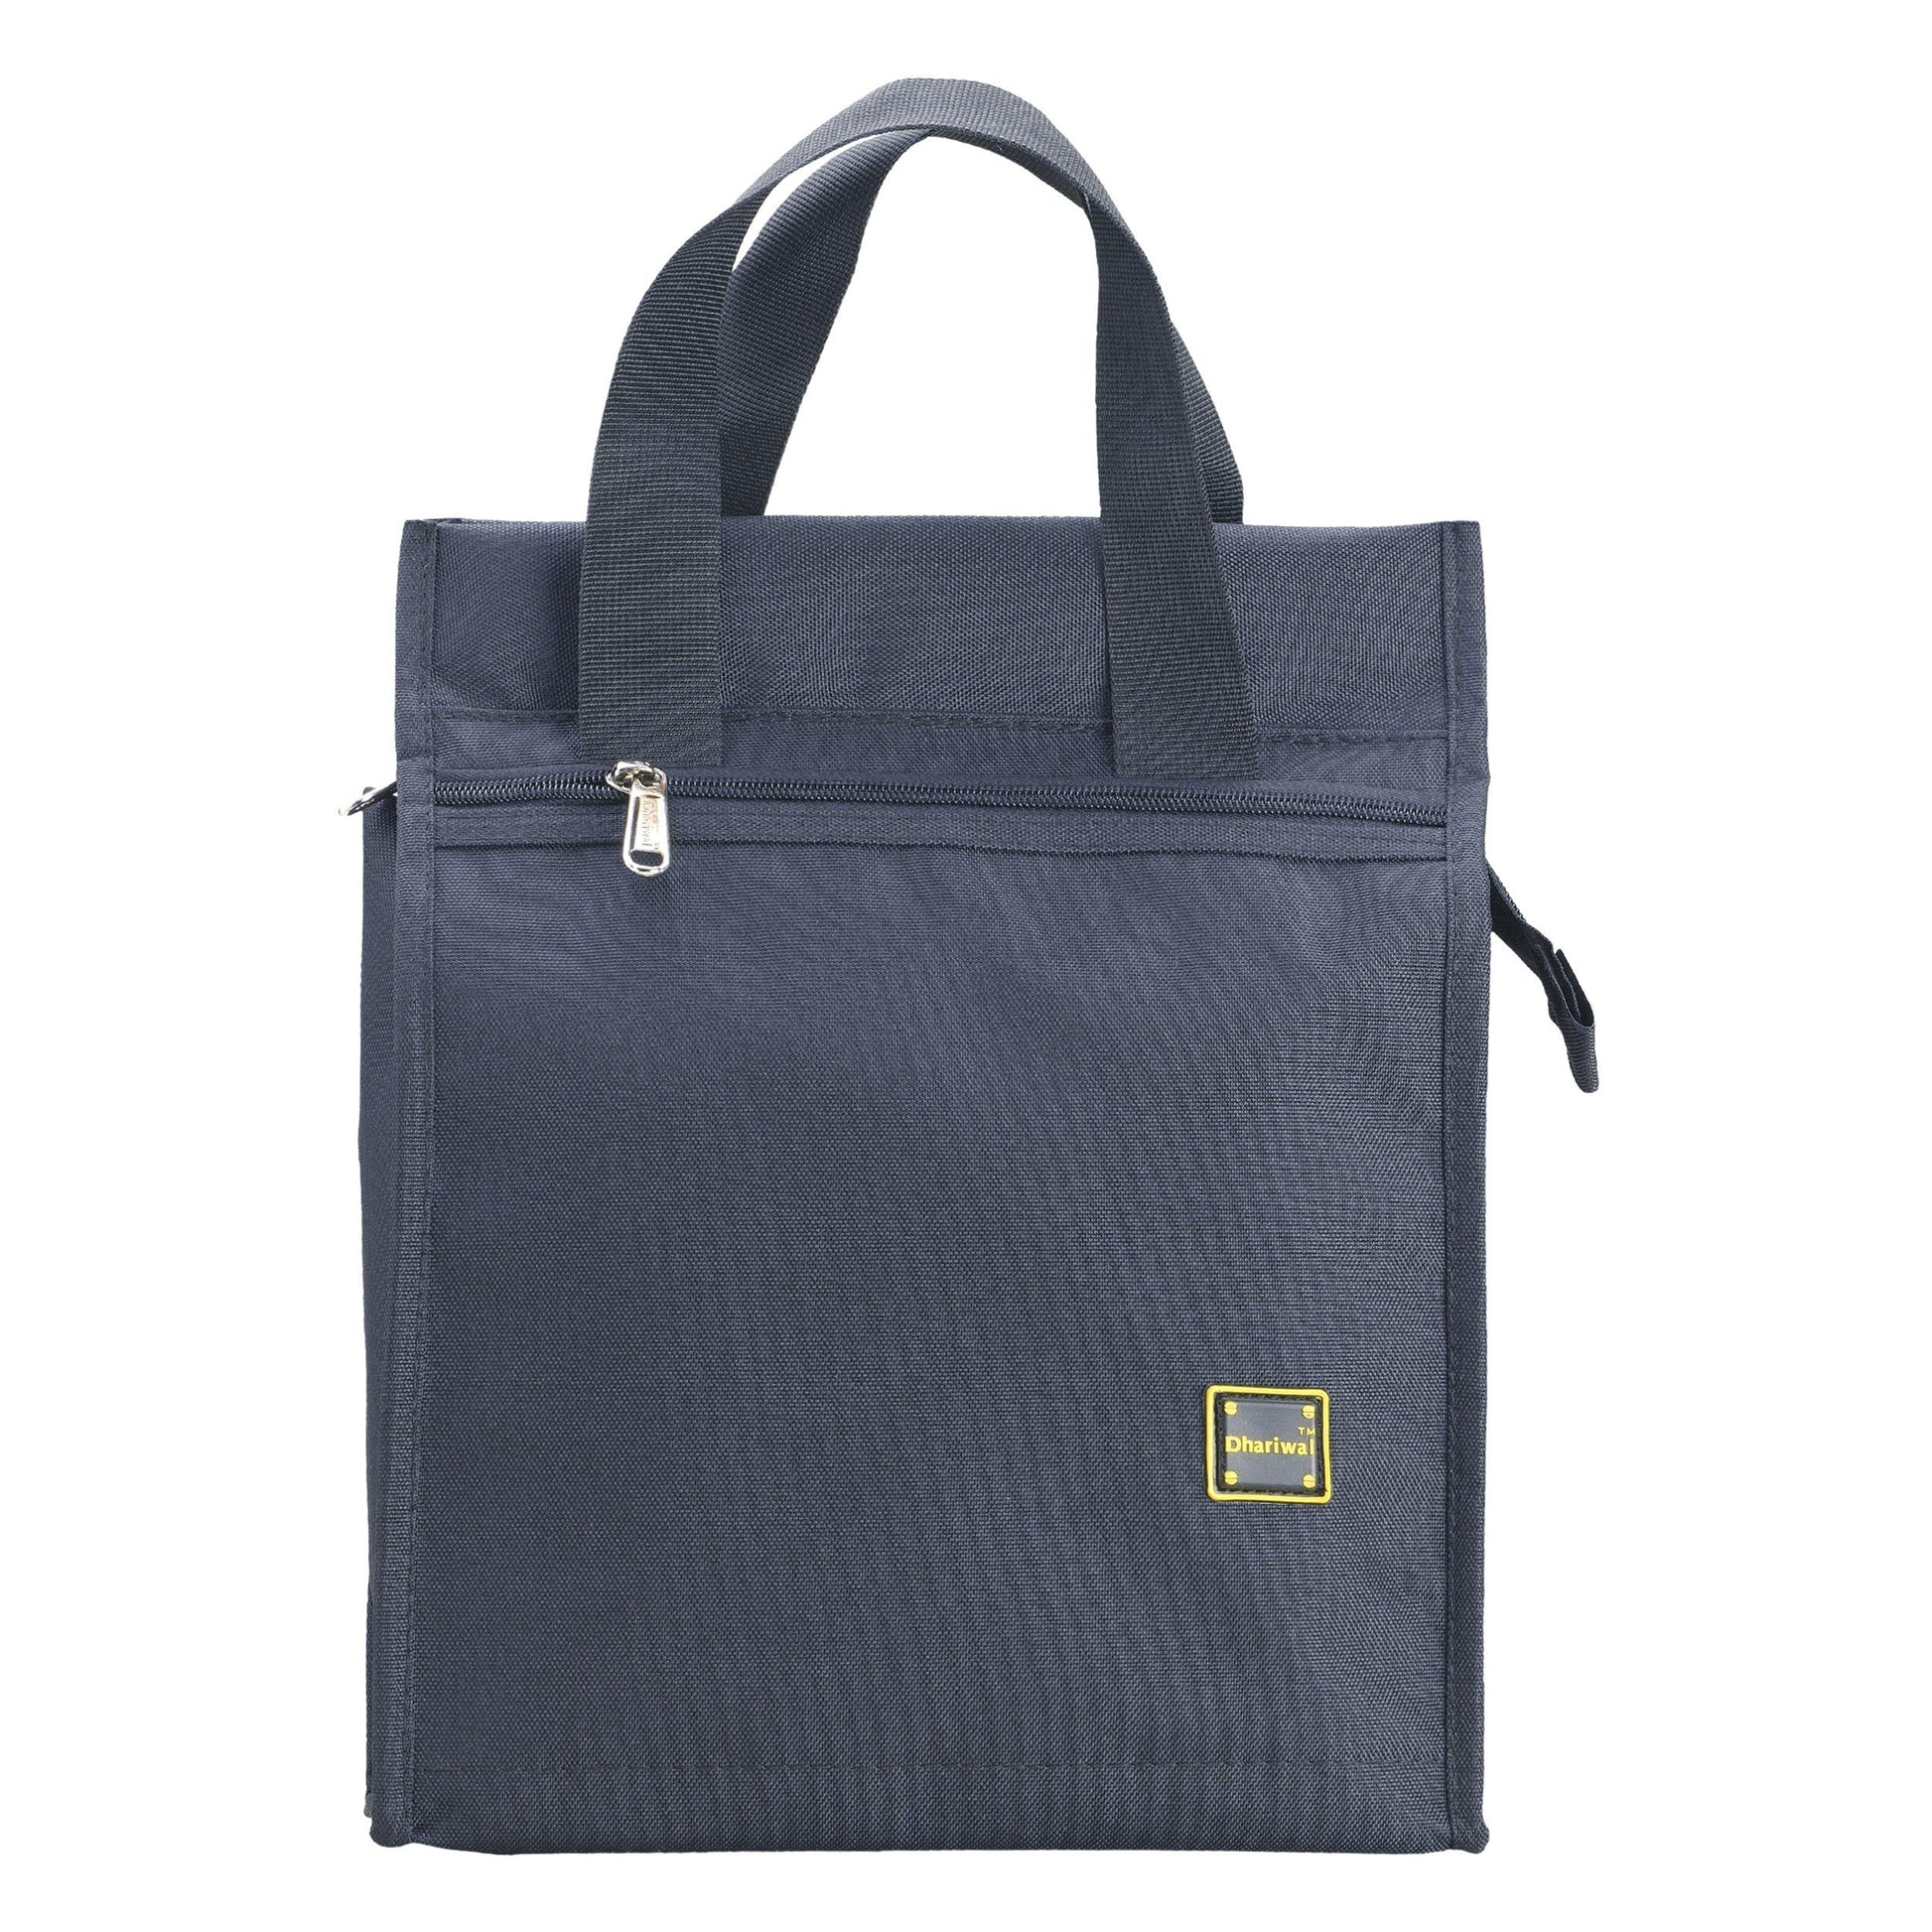 Thaili No.6 Tiffin Bag 16in x 13in x 6in TB-405 - Extra Large Tiffin Bags Dhariwal Blue 